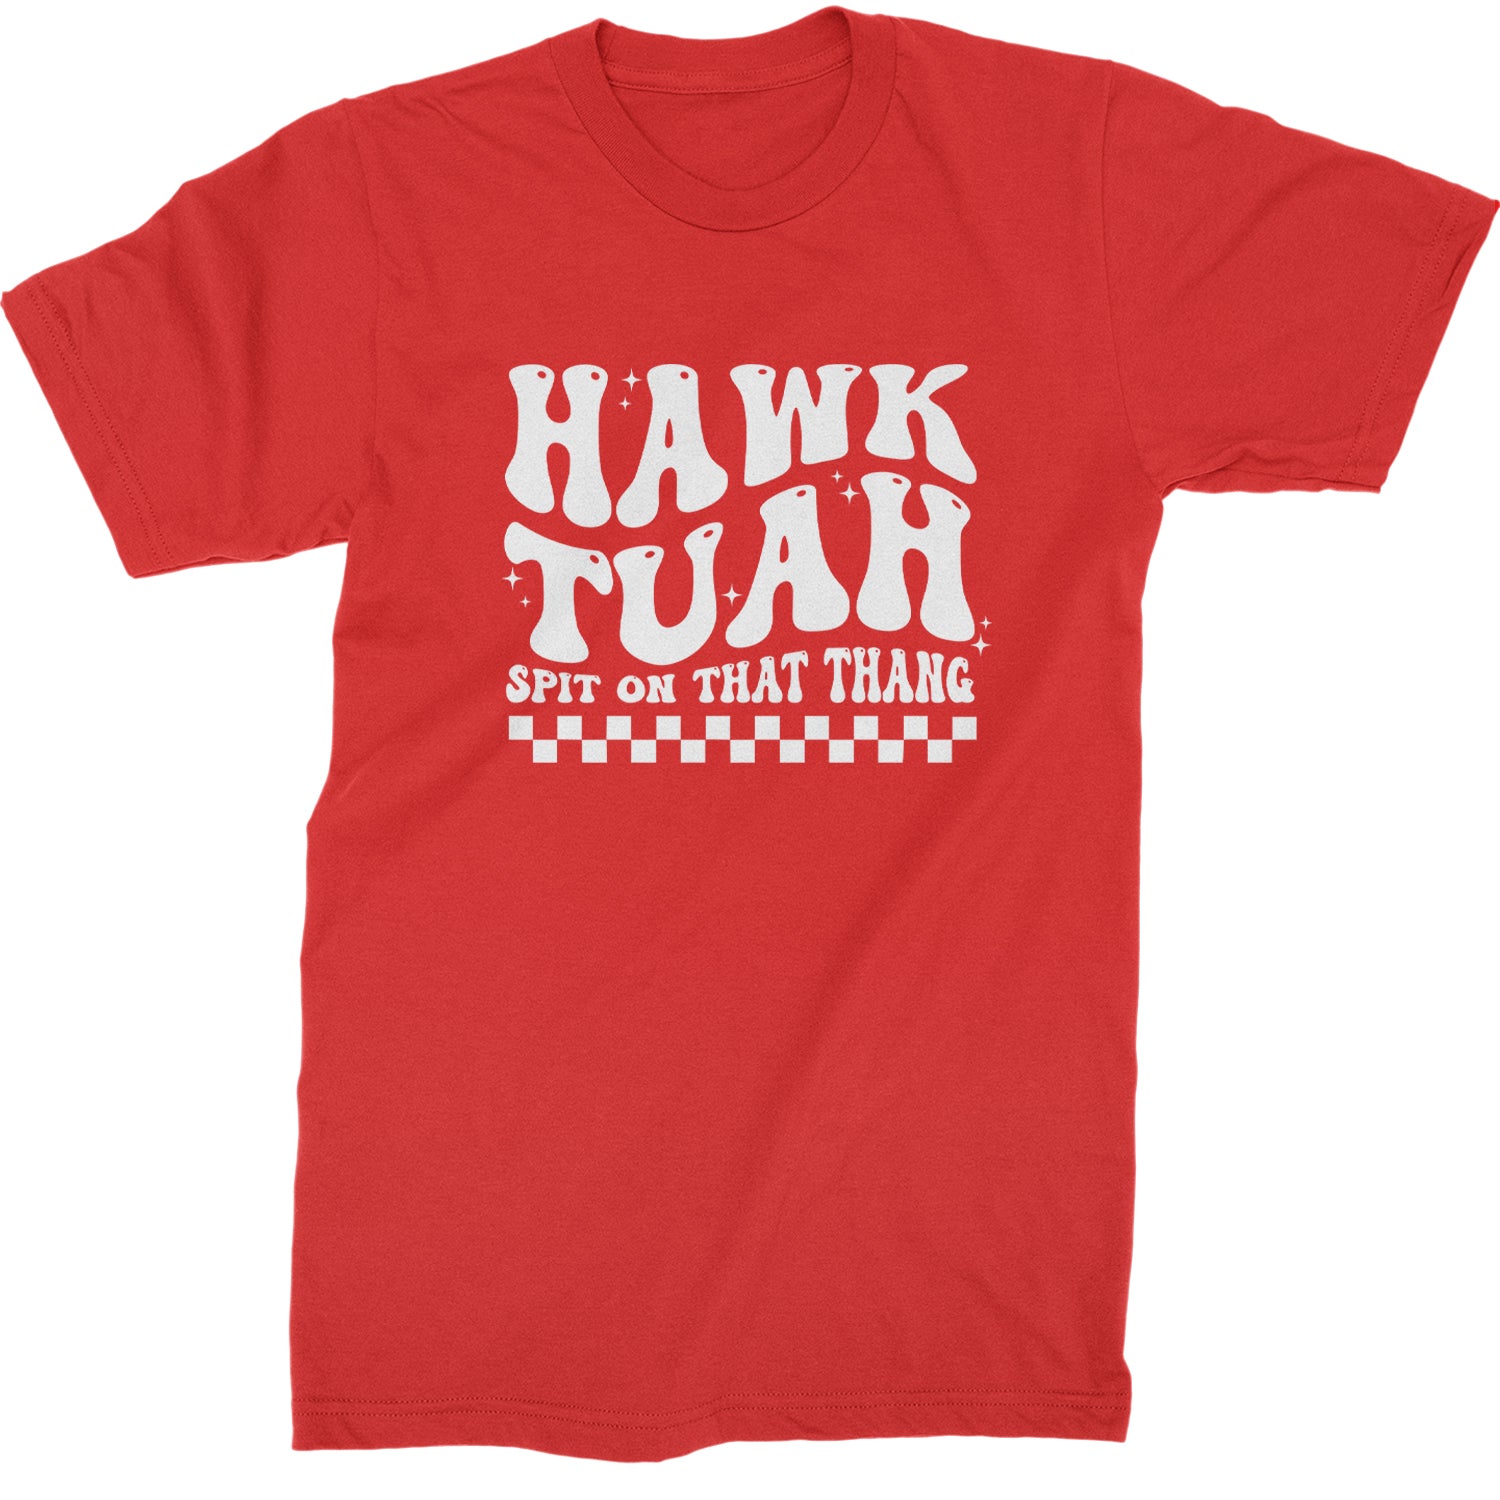 Hawk Tuah Spit On That Thang Mens T-shirt Red